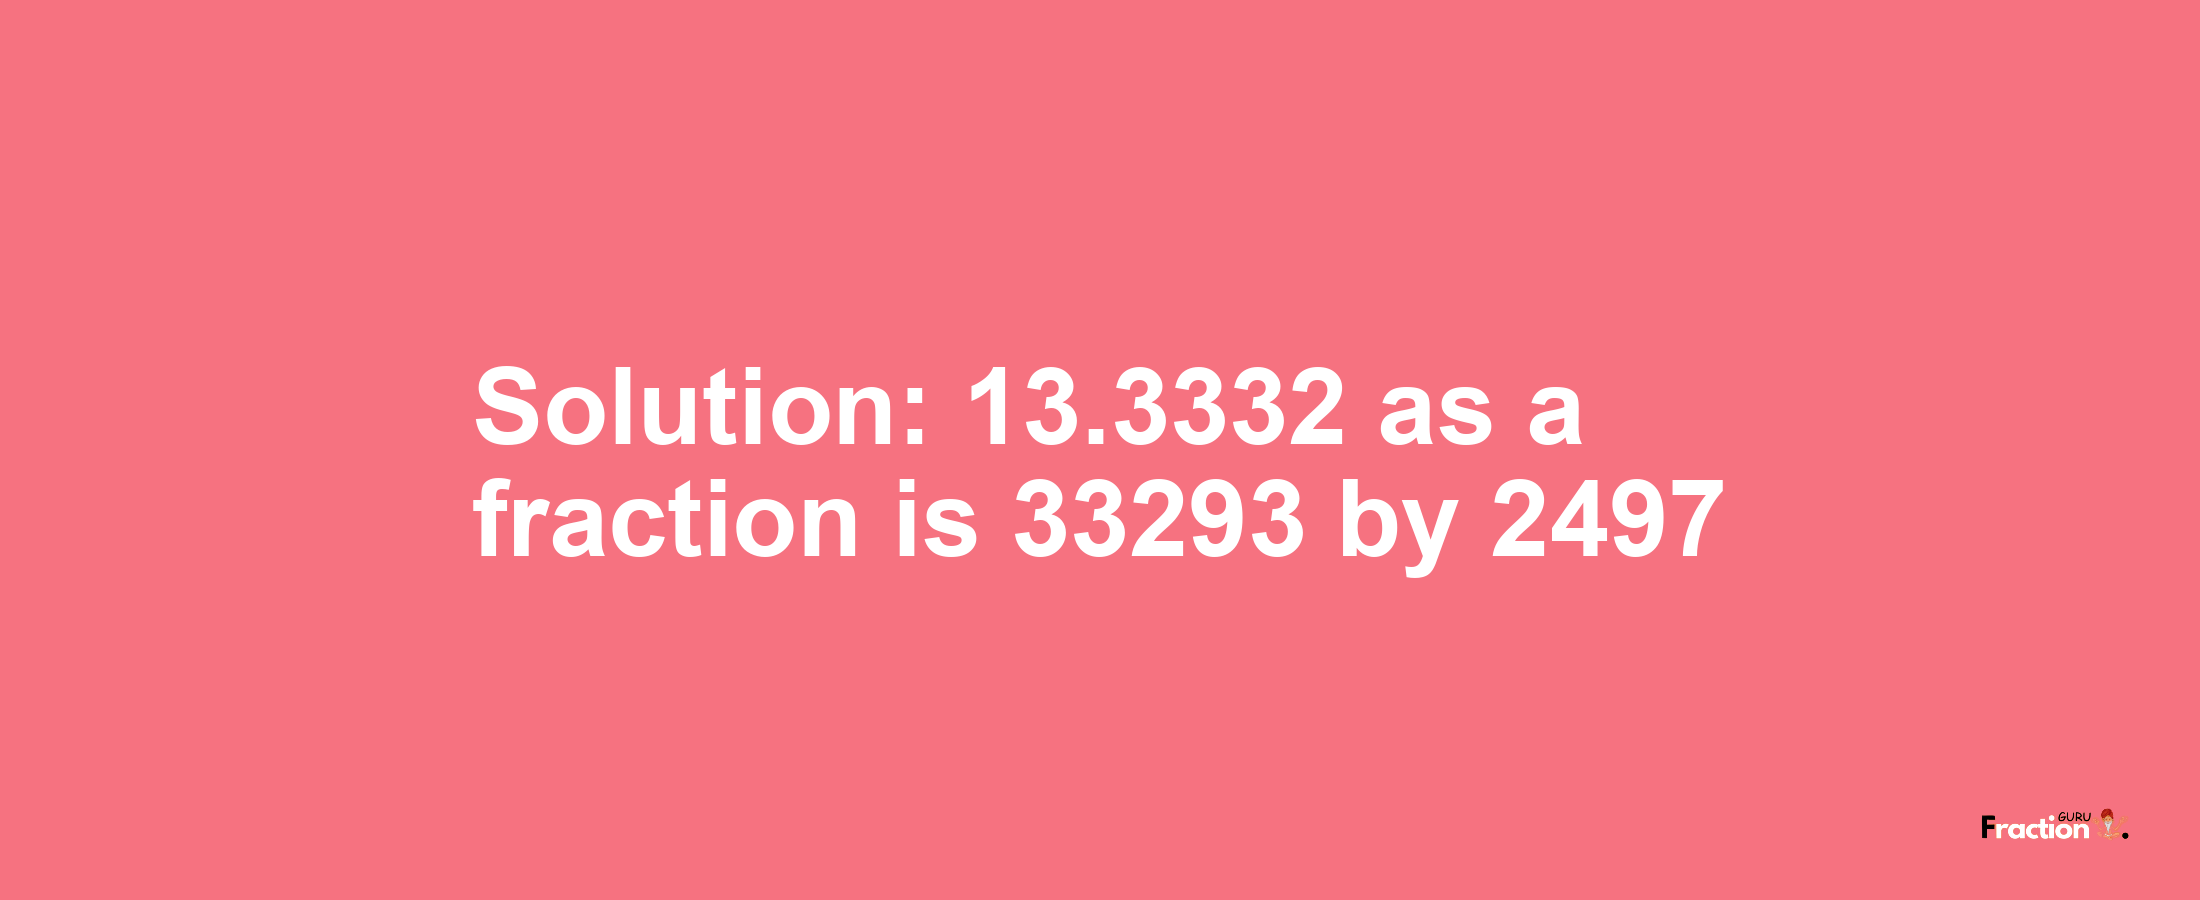 Solution:13.3332 as a fraction is 33293/2497